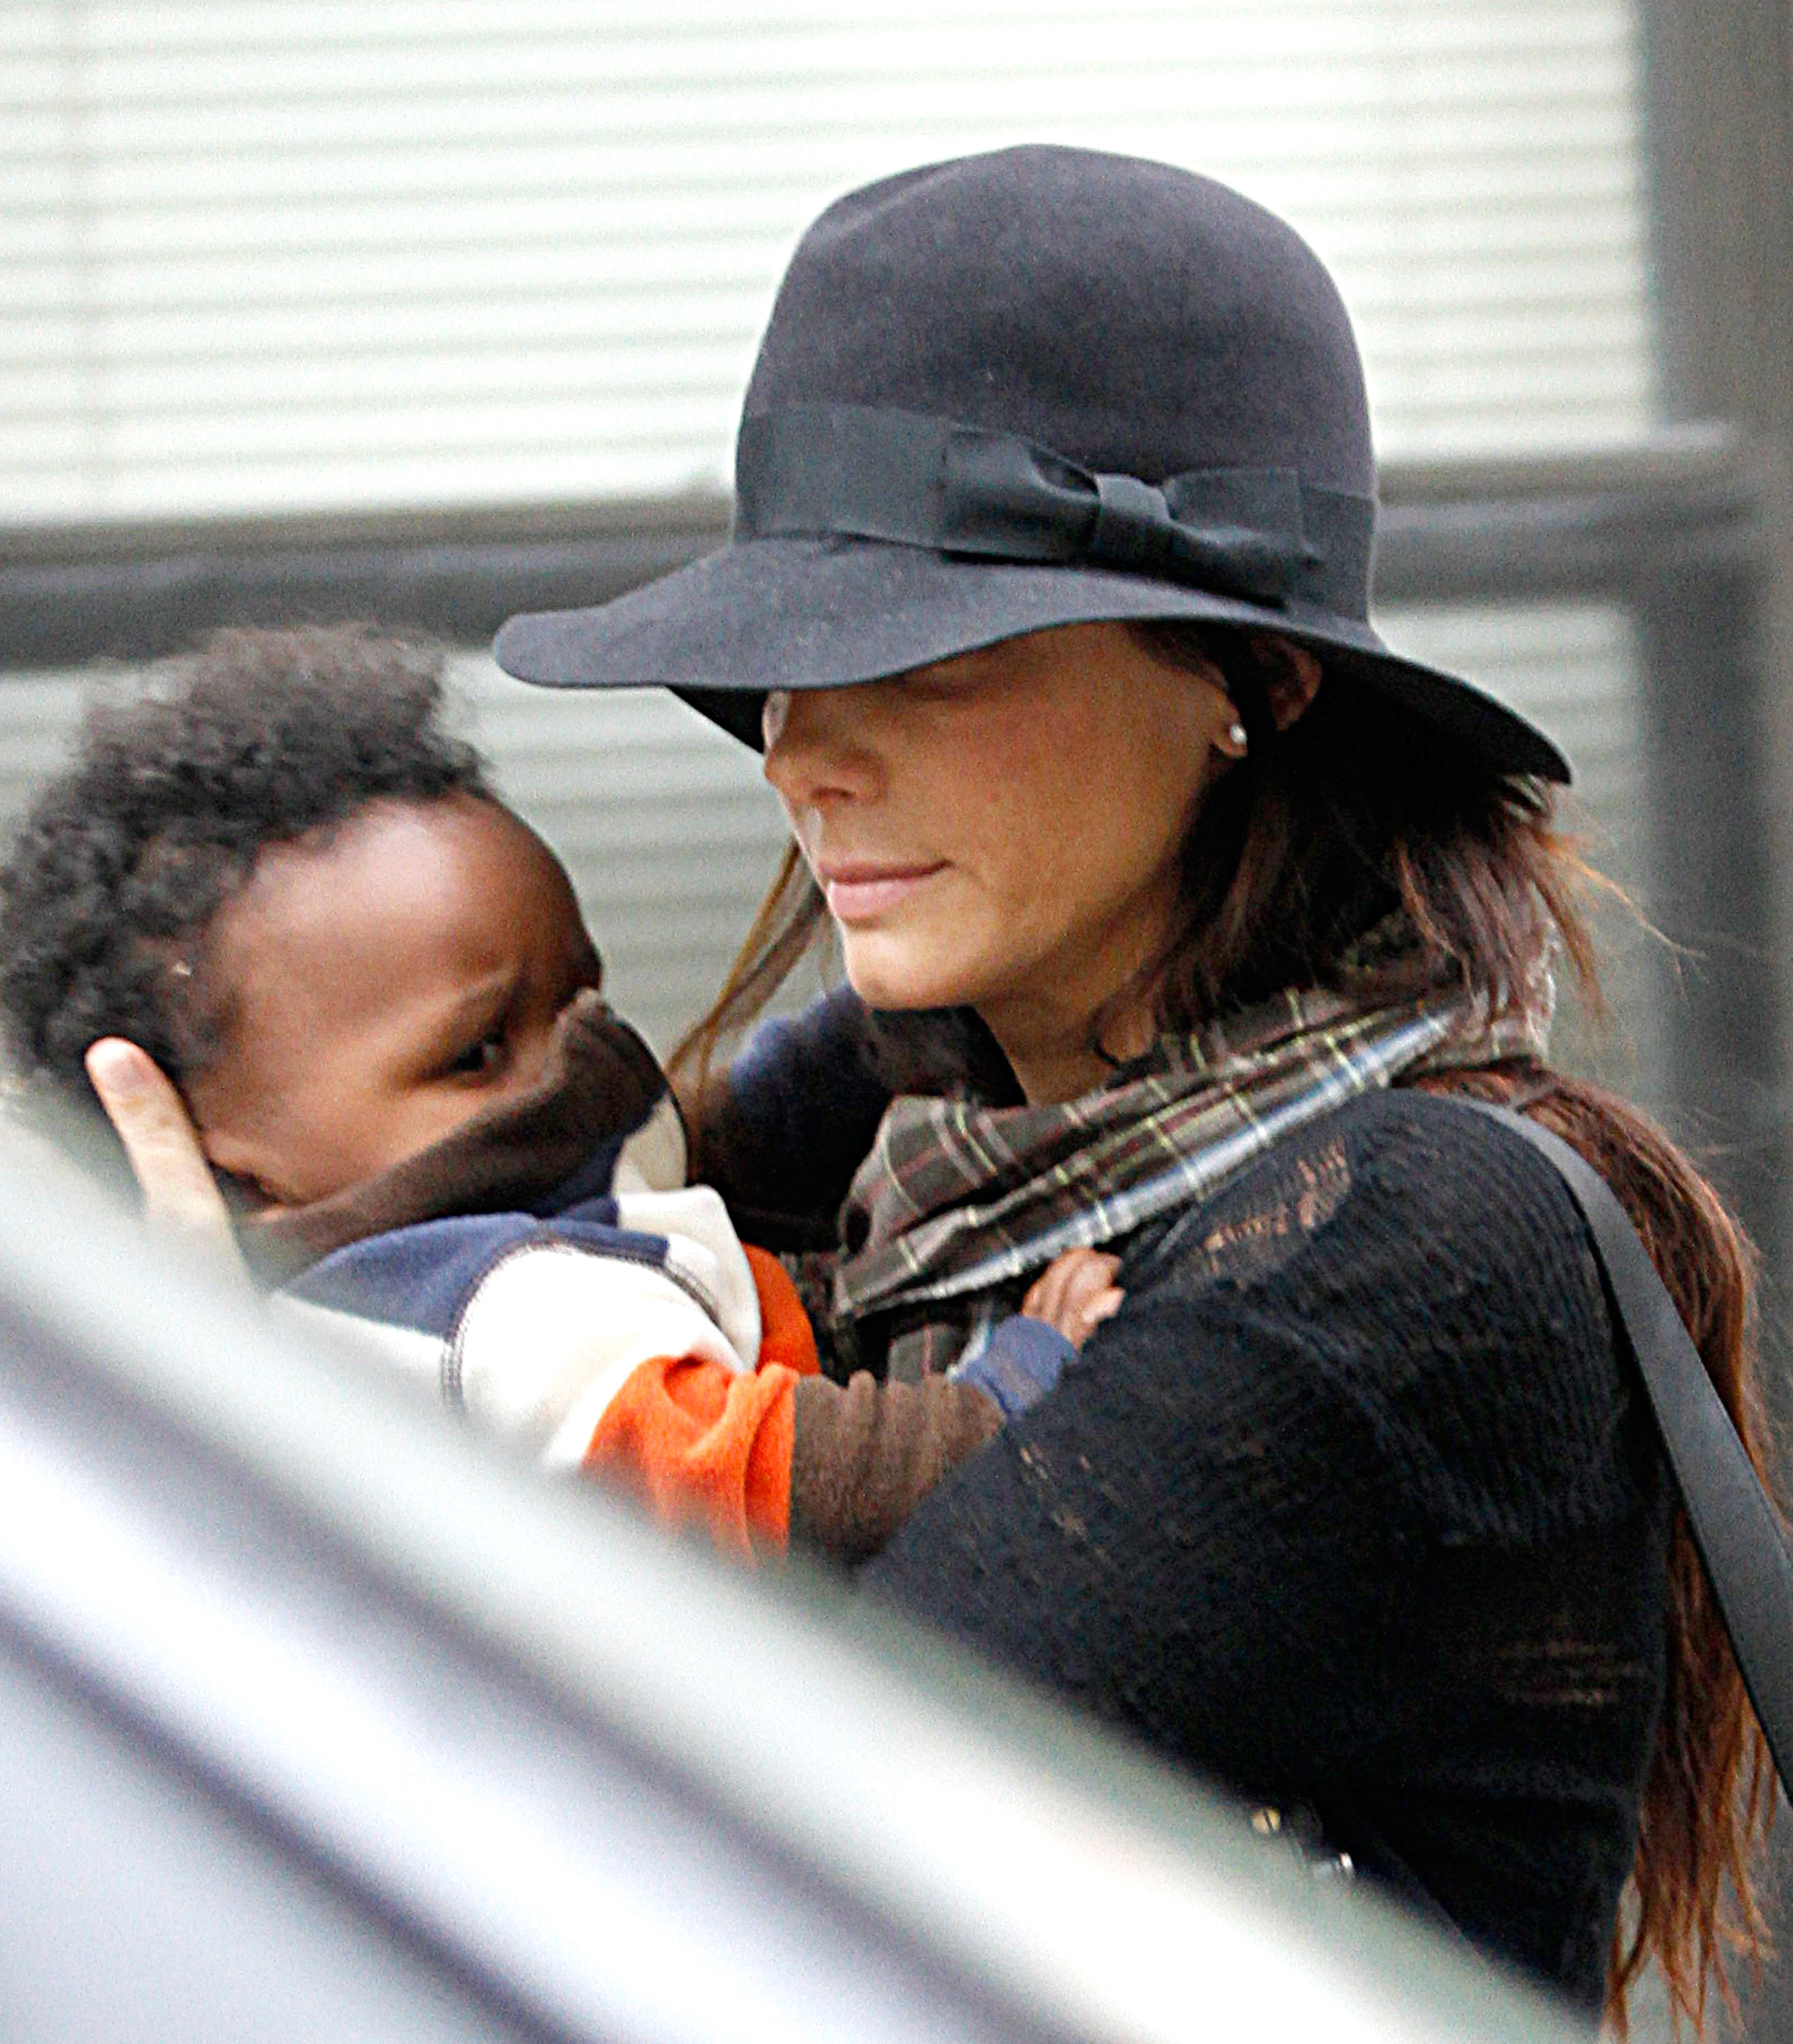 Sandra Bullock and her son Louis Bullock seen on the streets of Manhattan on November 6, 2010, in New York City | Source: Getty Images